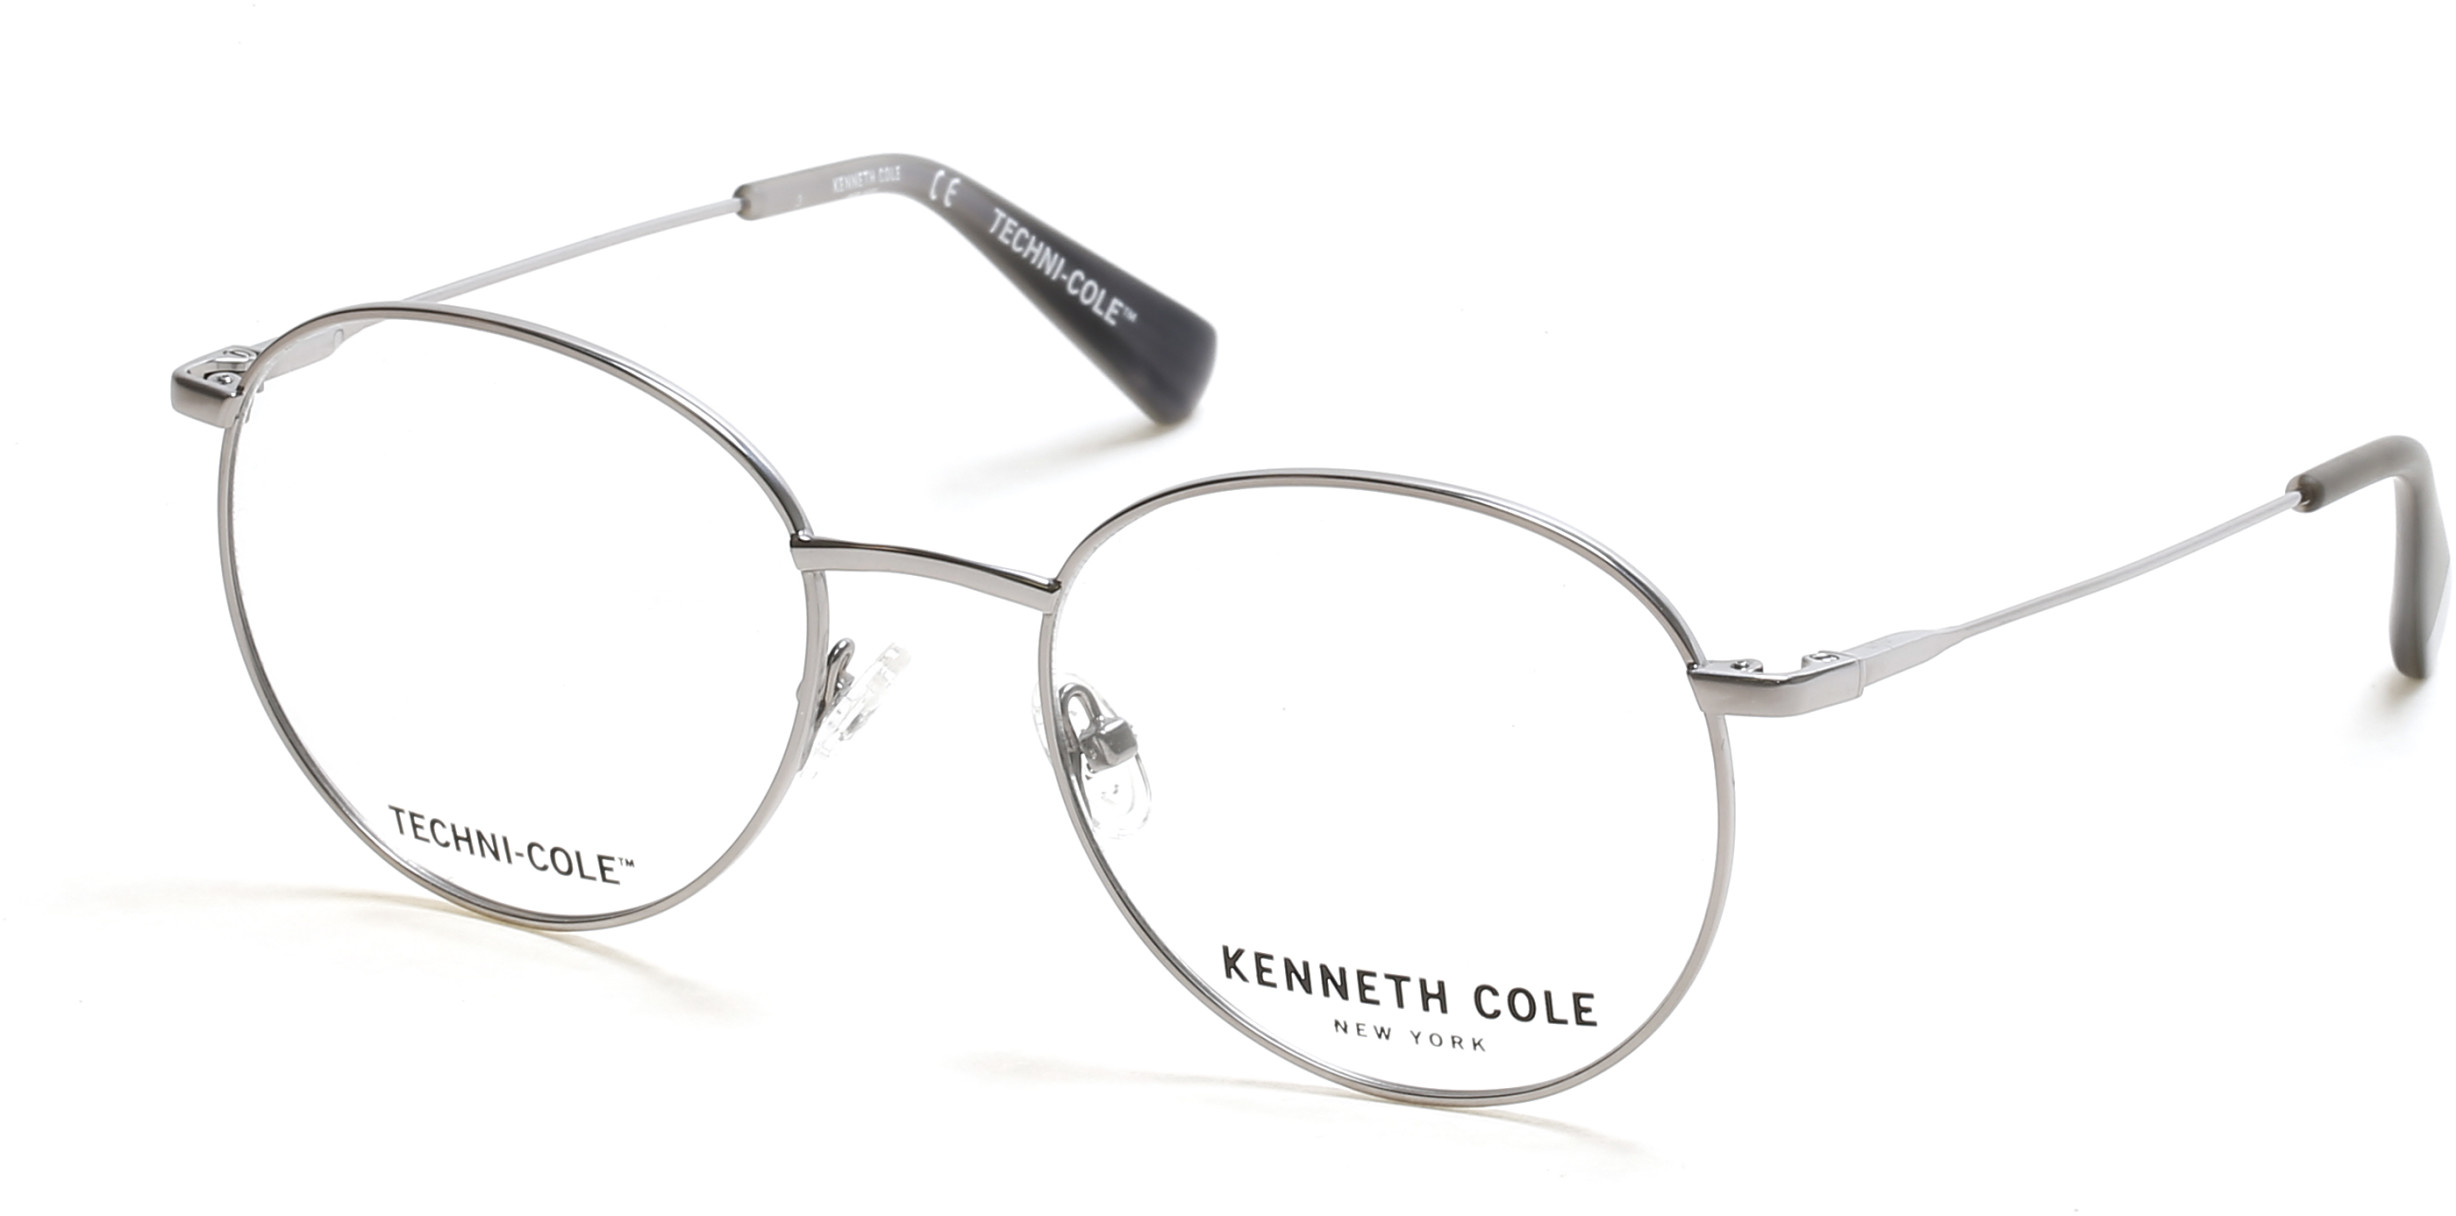 KENNETH COLE NY 0332 010